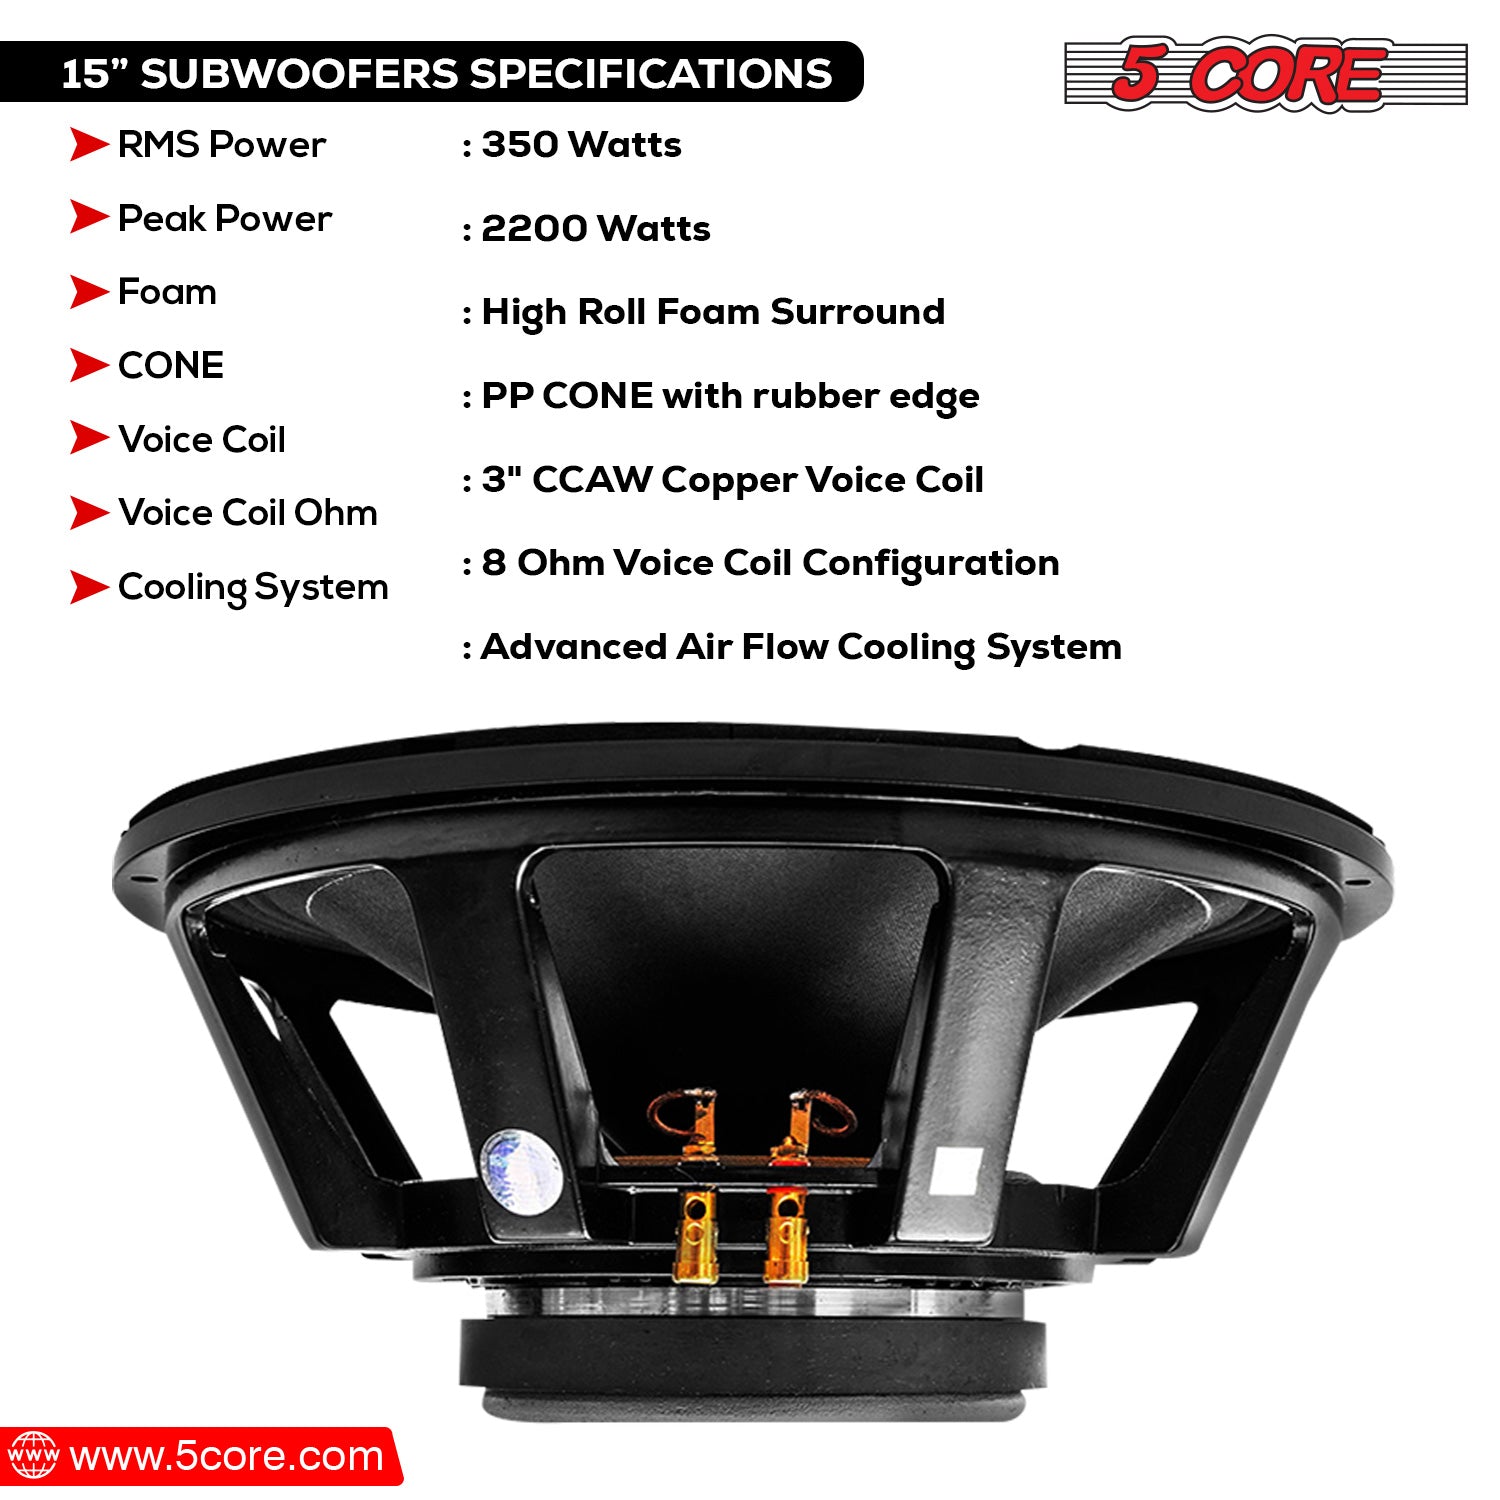 Specification of 15 Inch Subwoofer